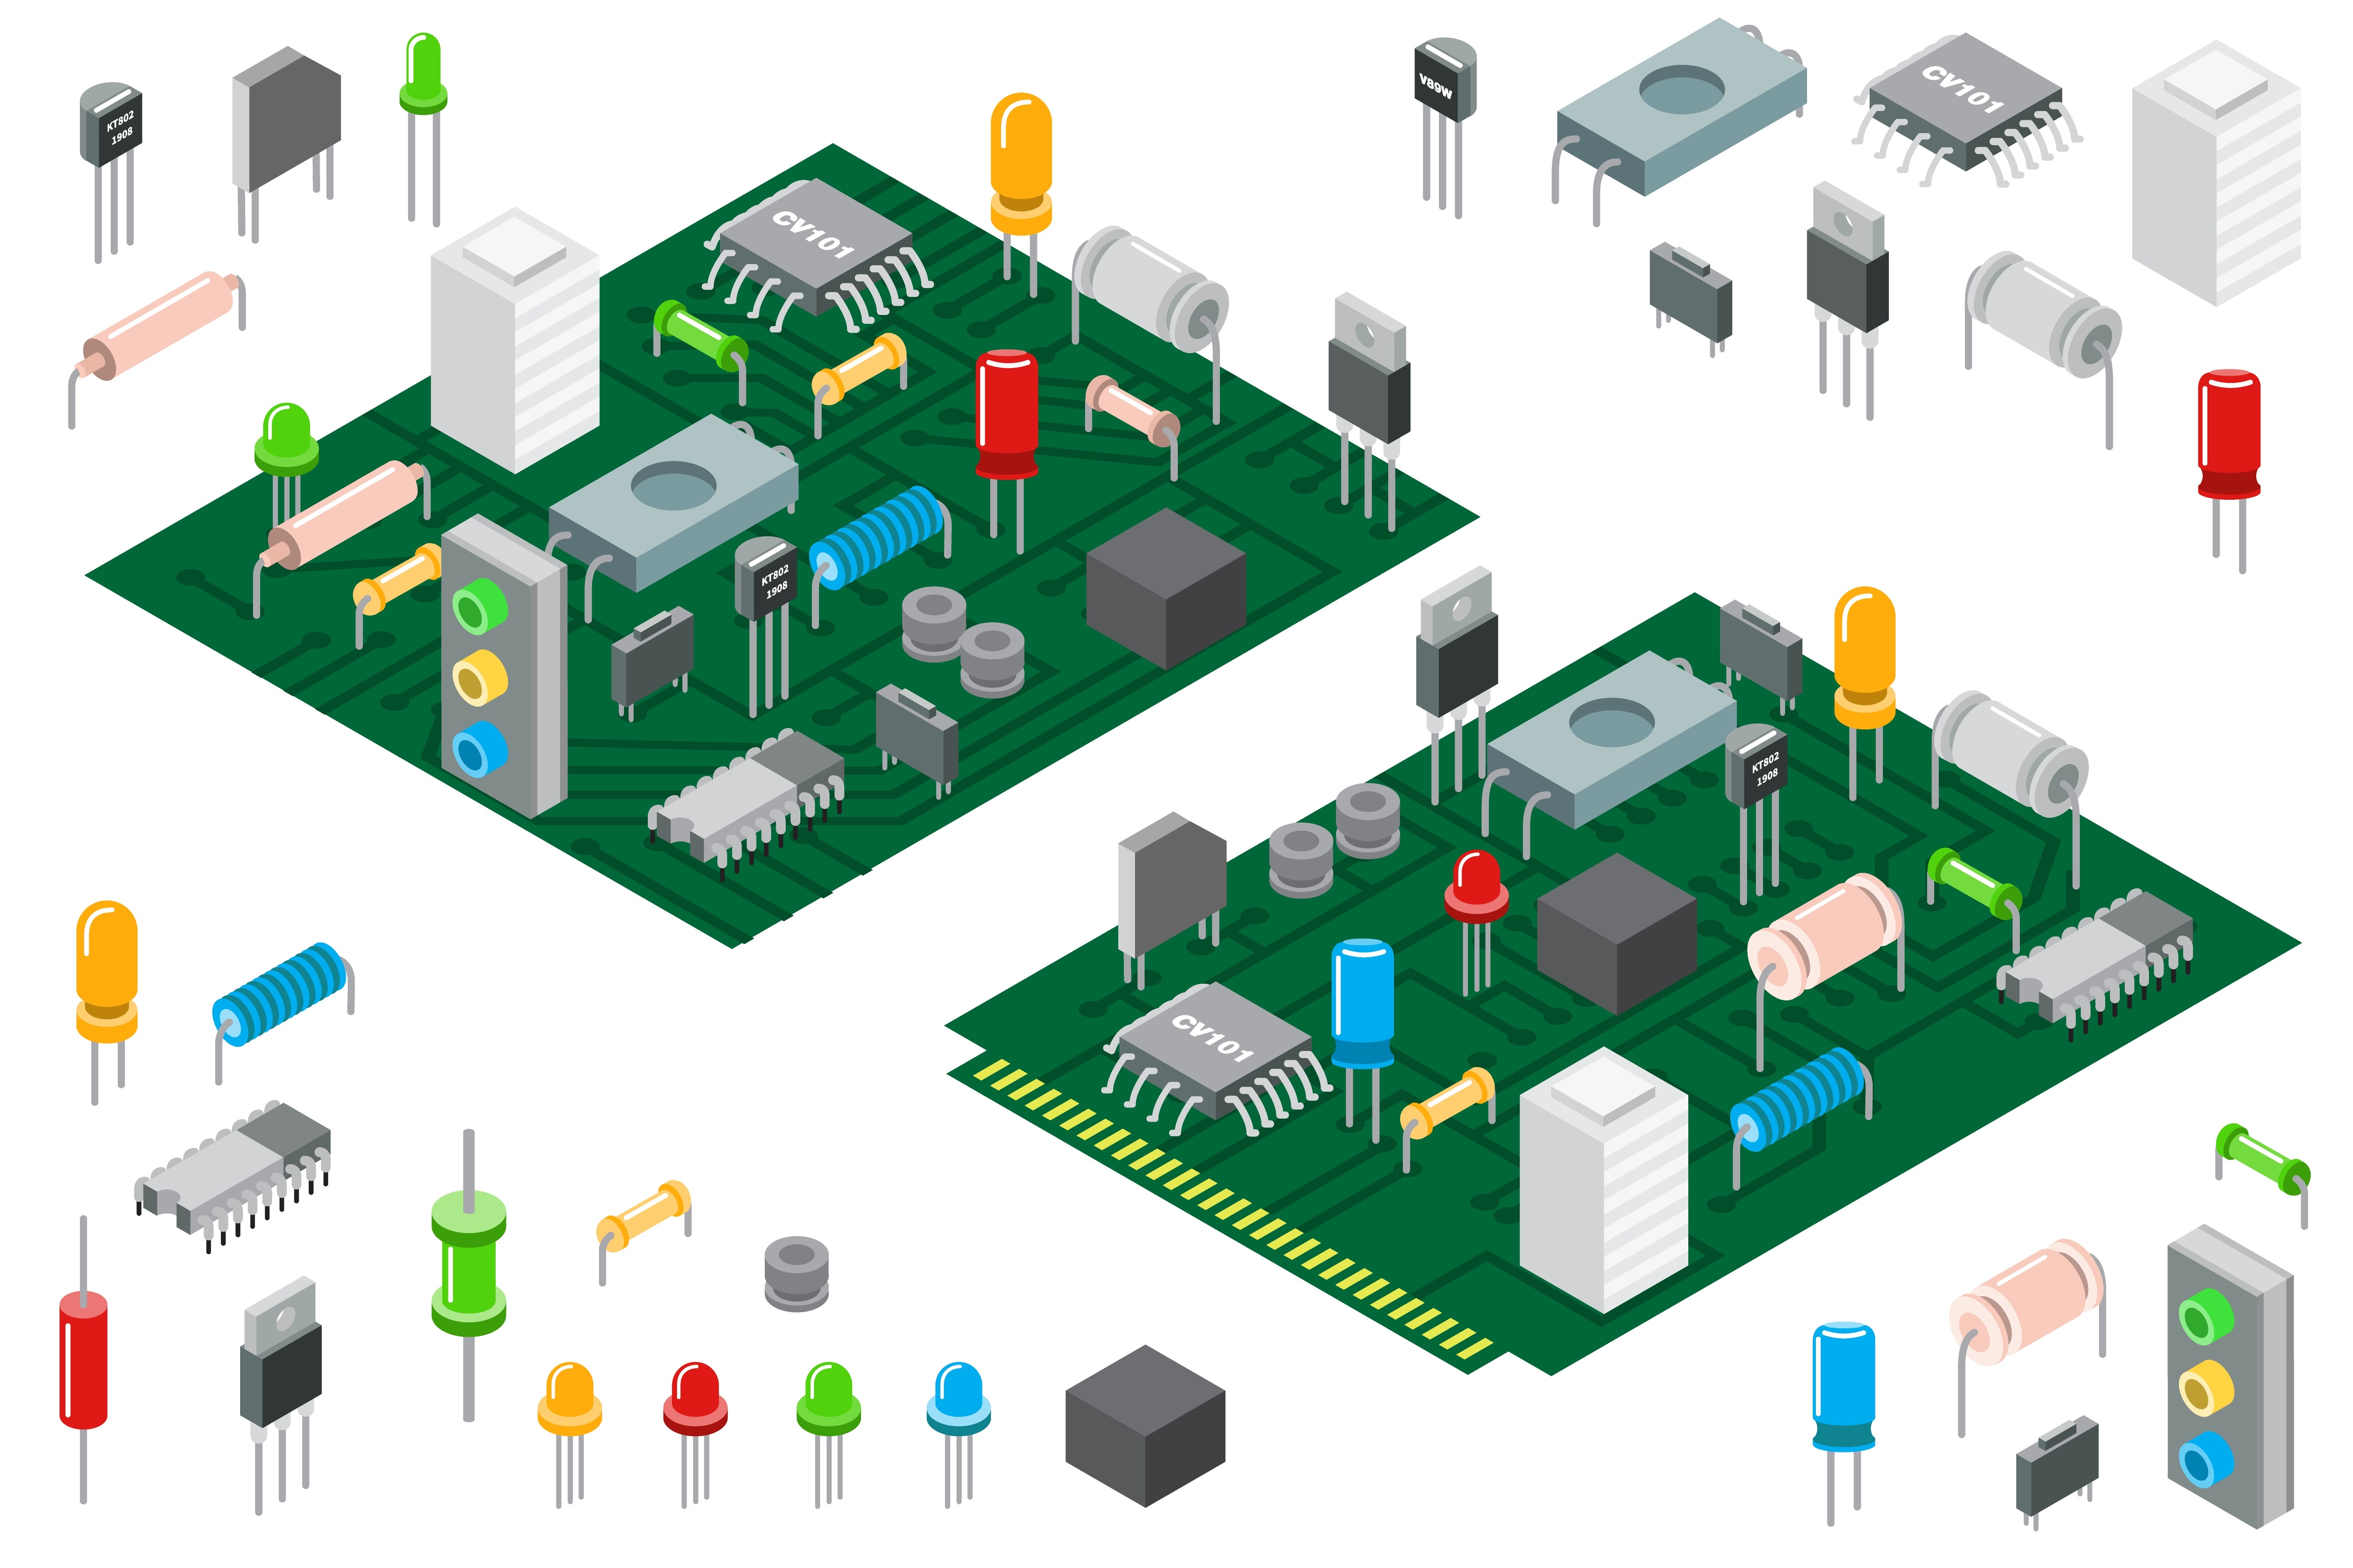 Embedded systems circuit boards